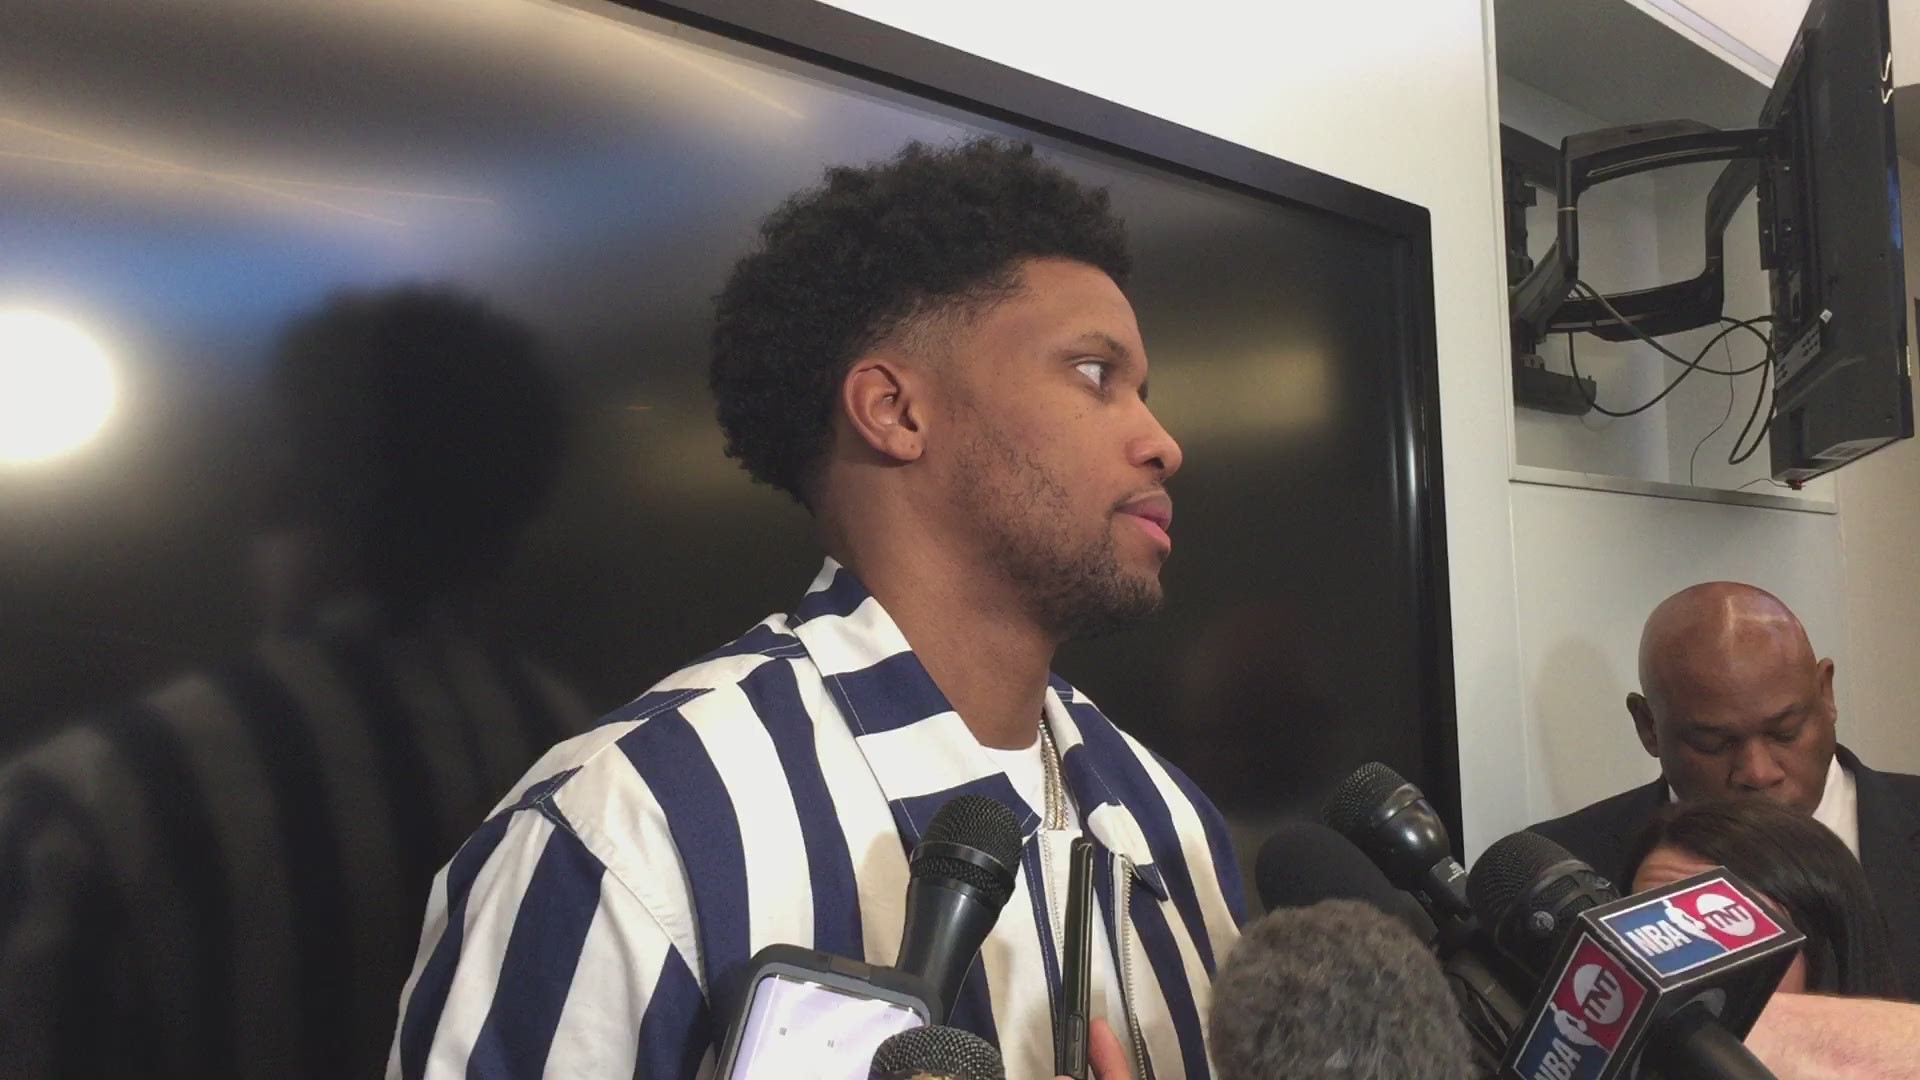 Spurs forward Rudy Gay talks about his performance in Game 6